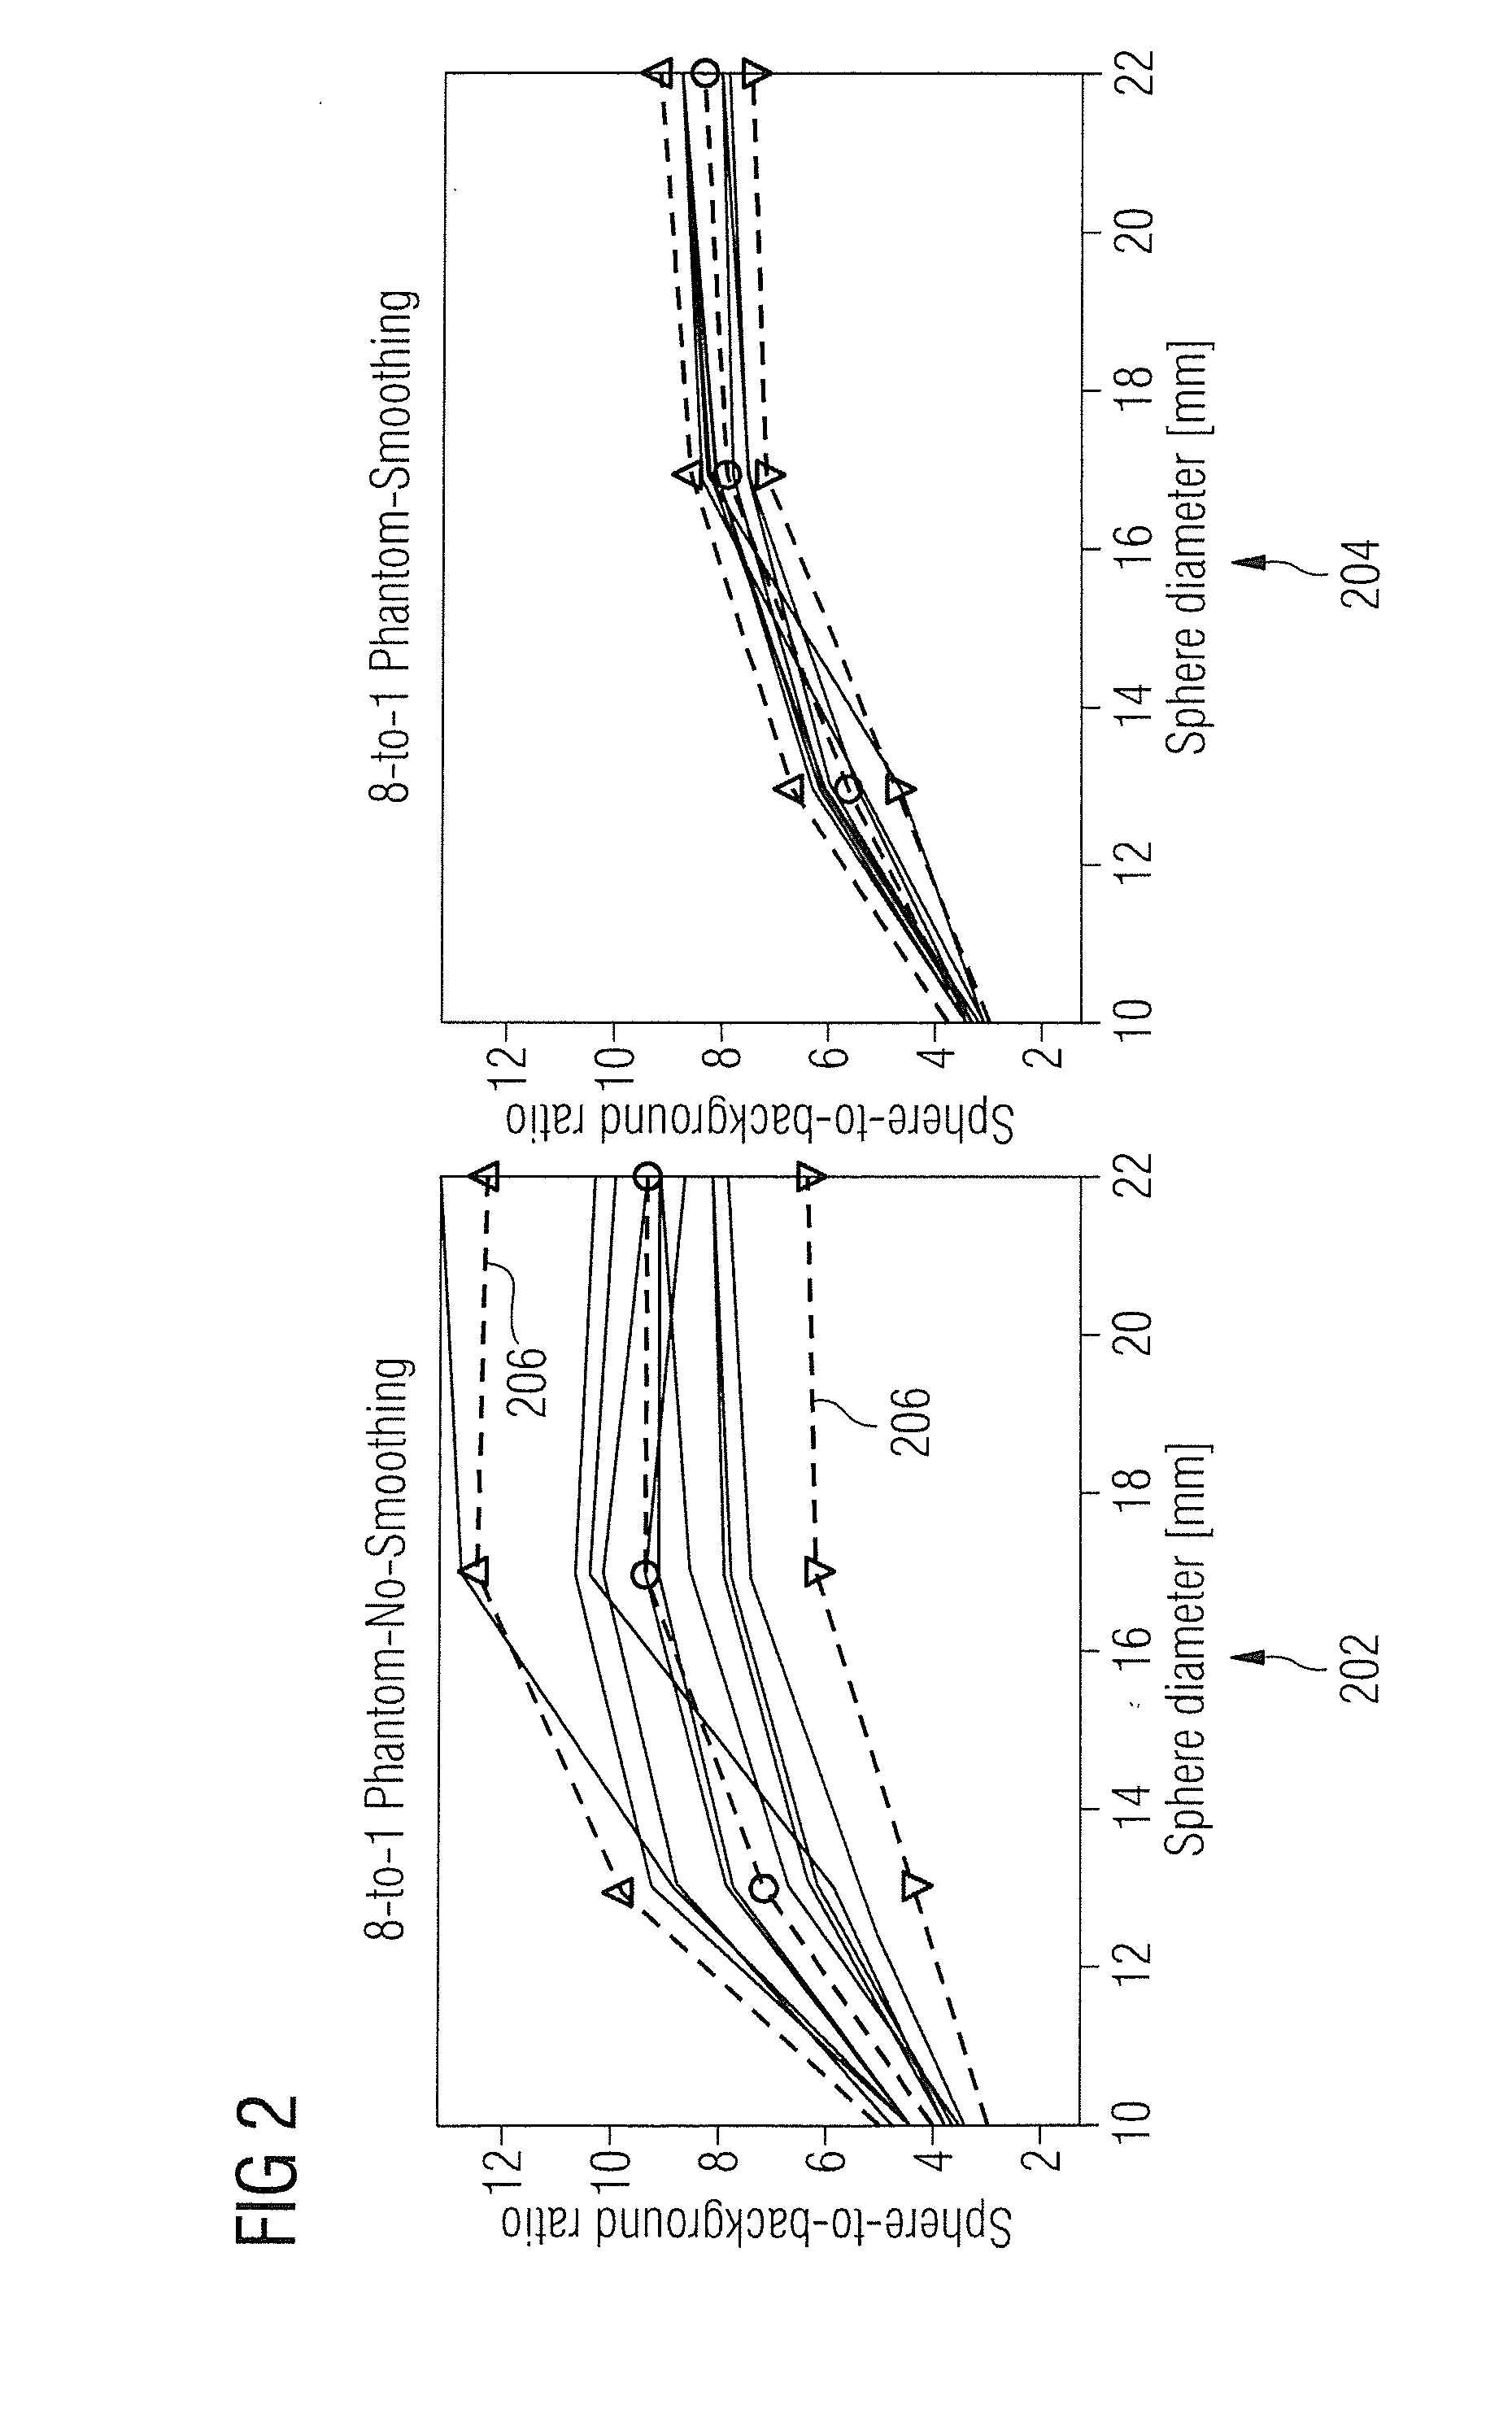 Method and apparatus for calibrating medical image data